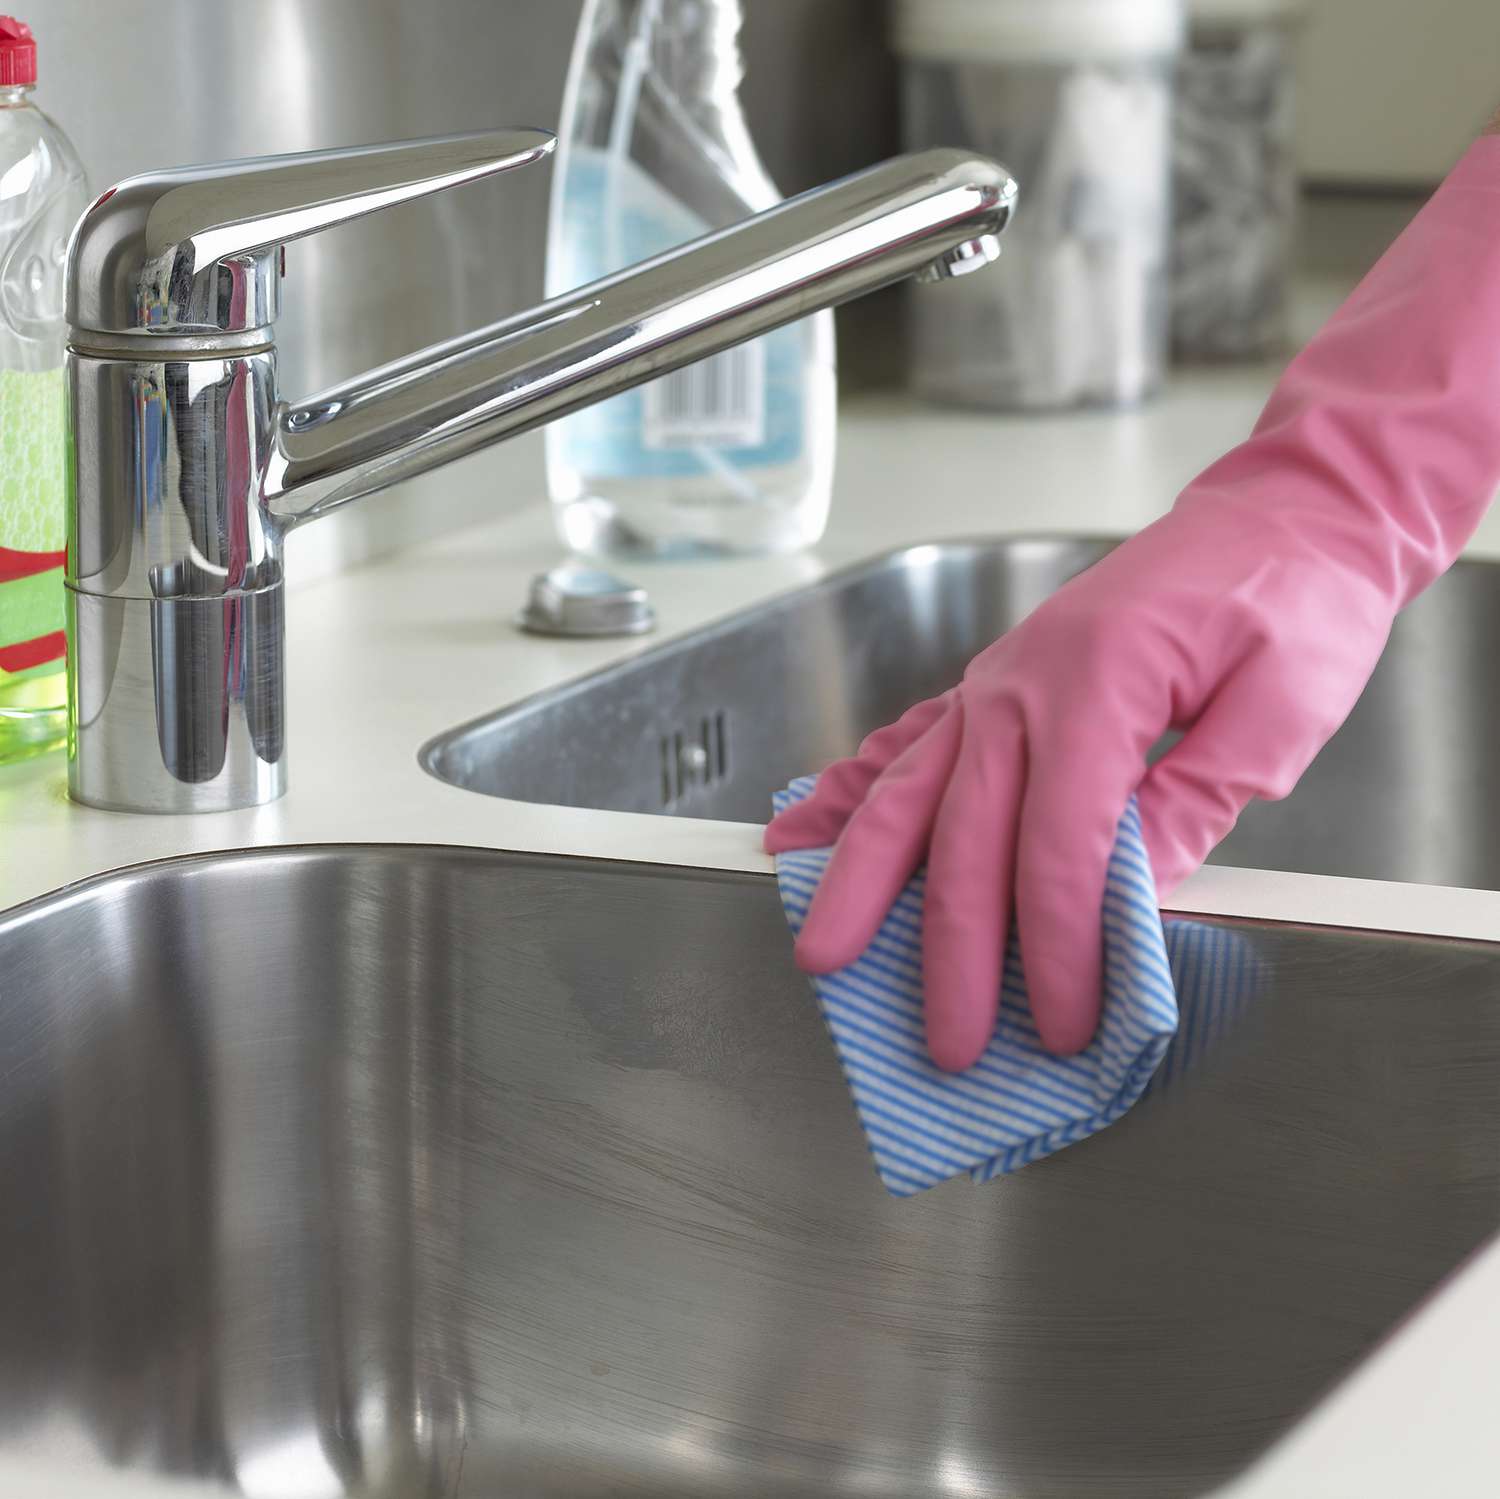 Cleaning kitchen sink with rubber gloves